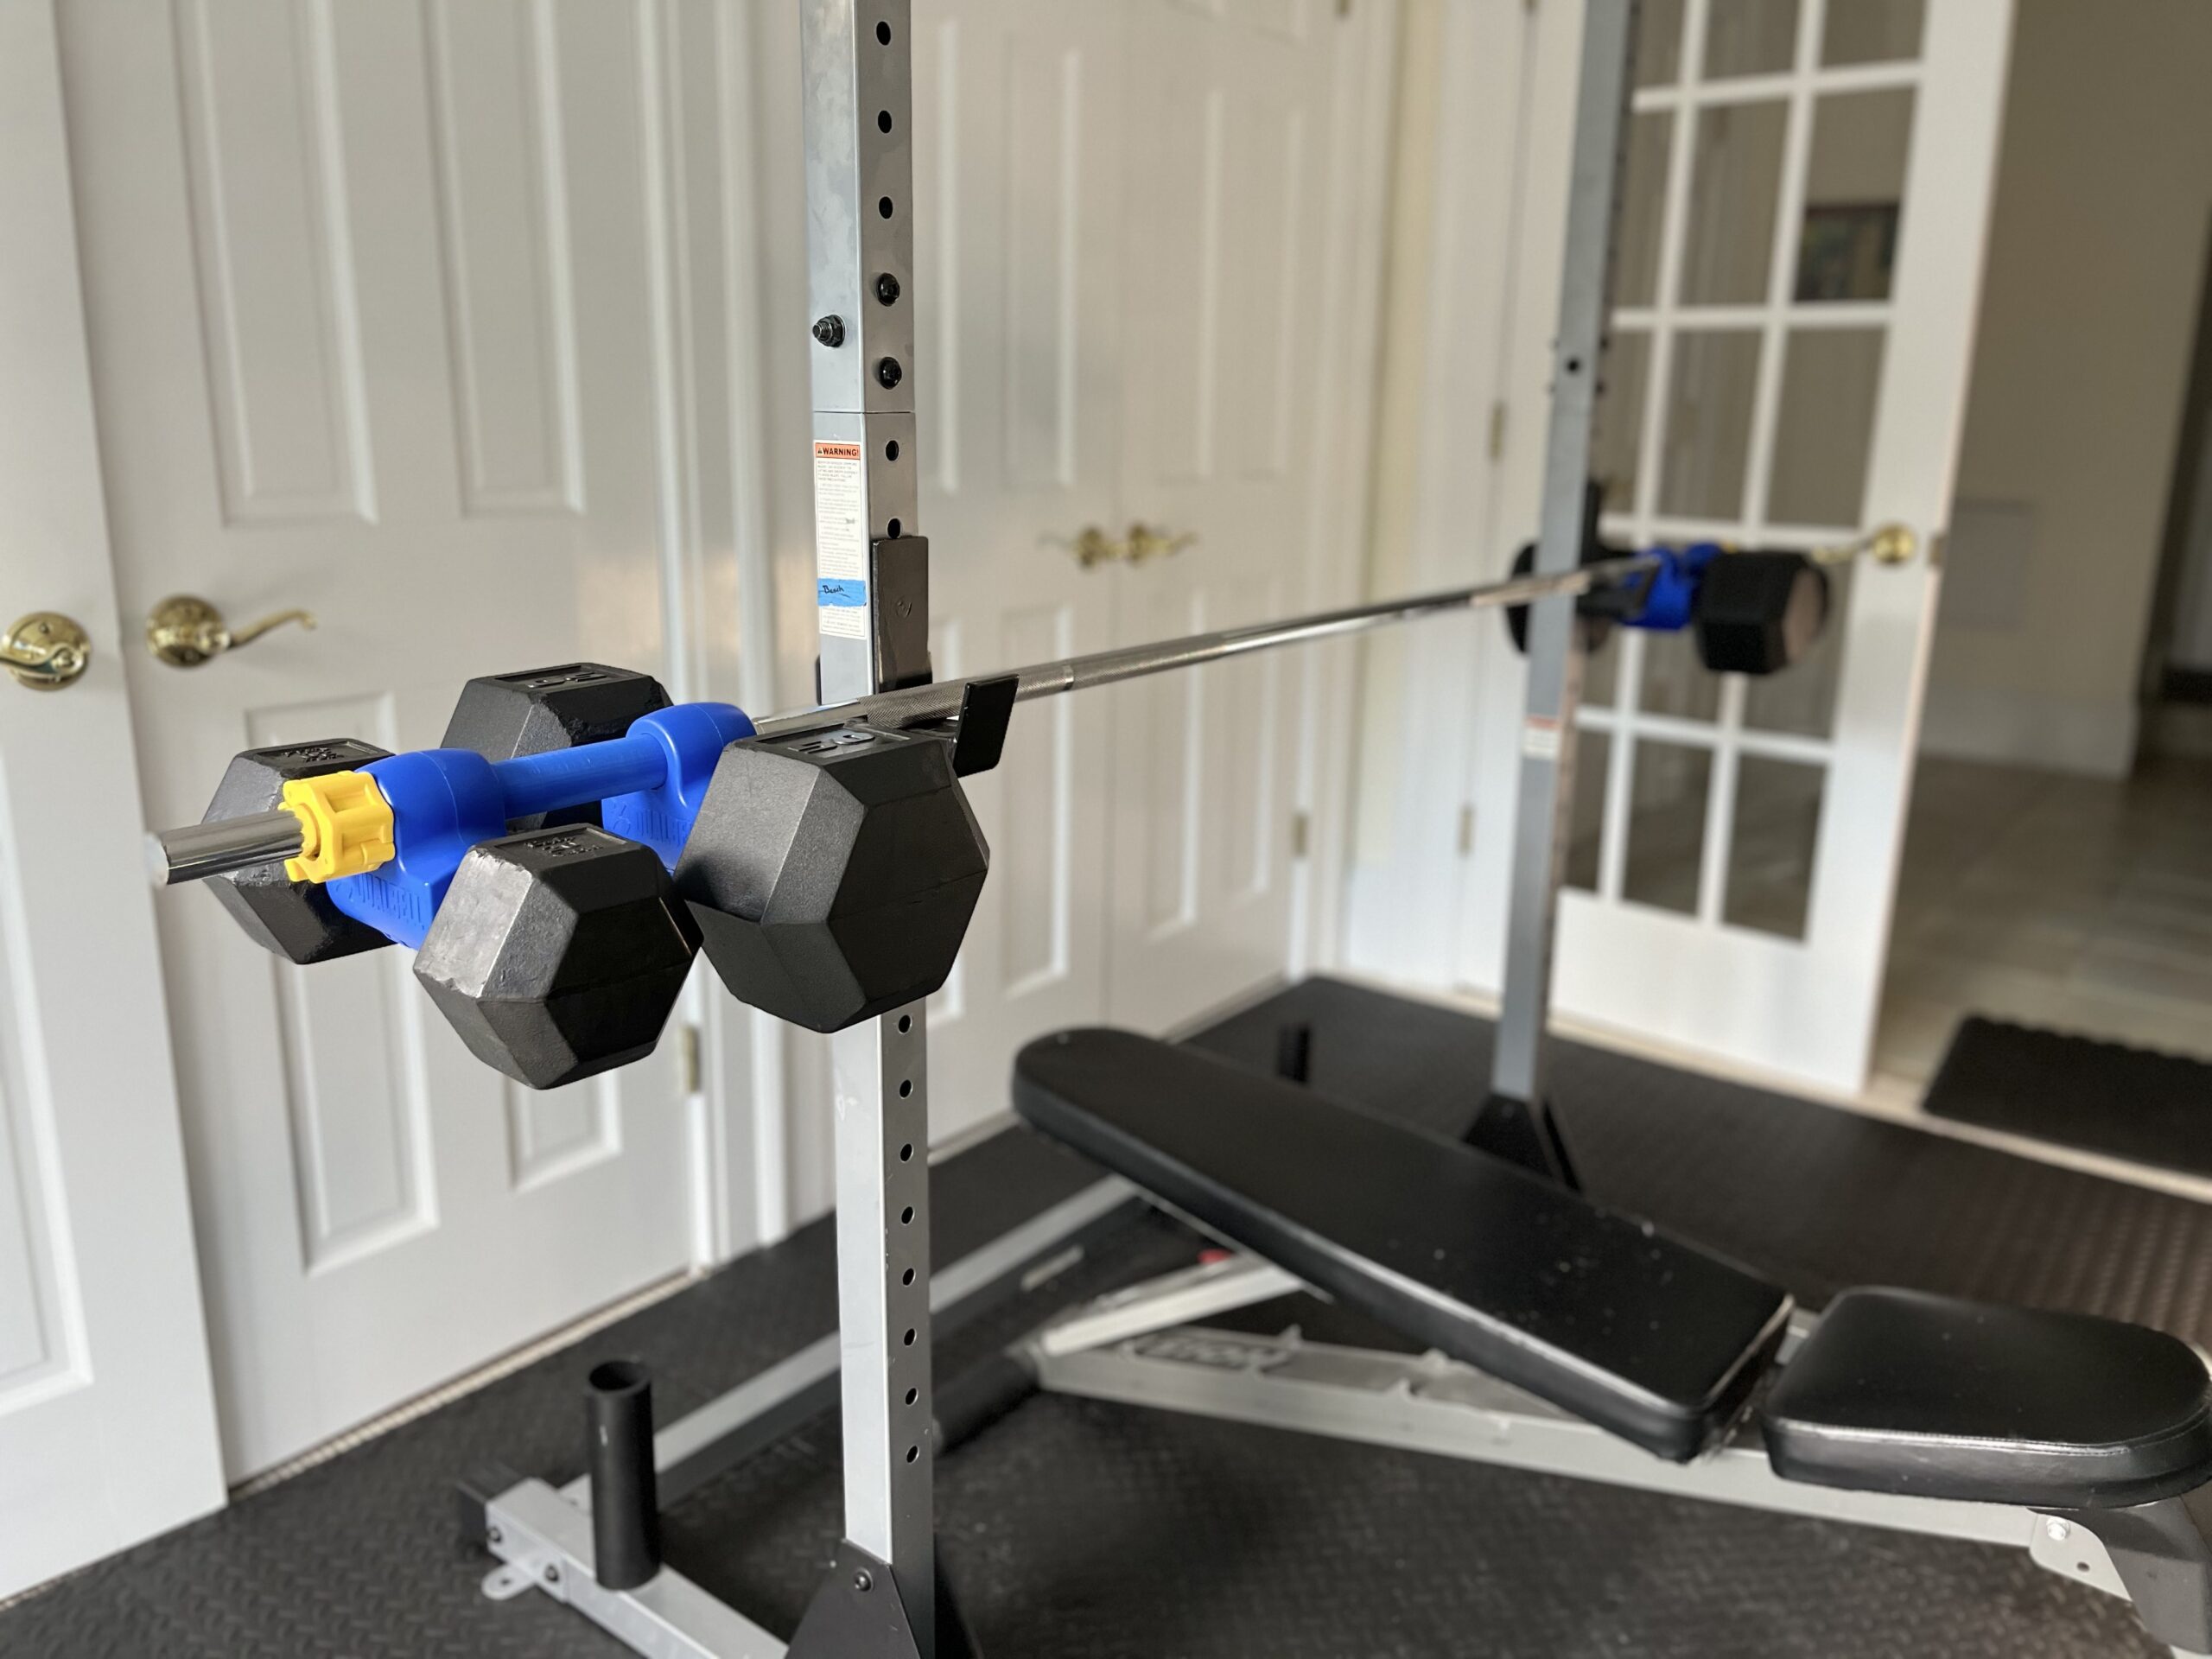 Dualbell shown in home gym holding four dumbbells on a barbell ready for bench press.